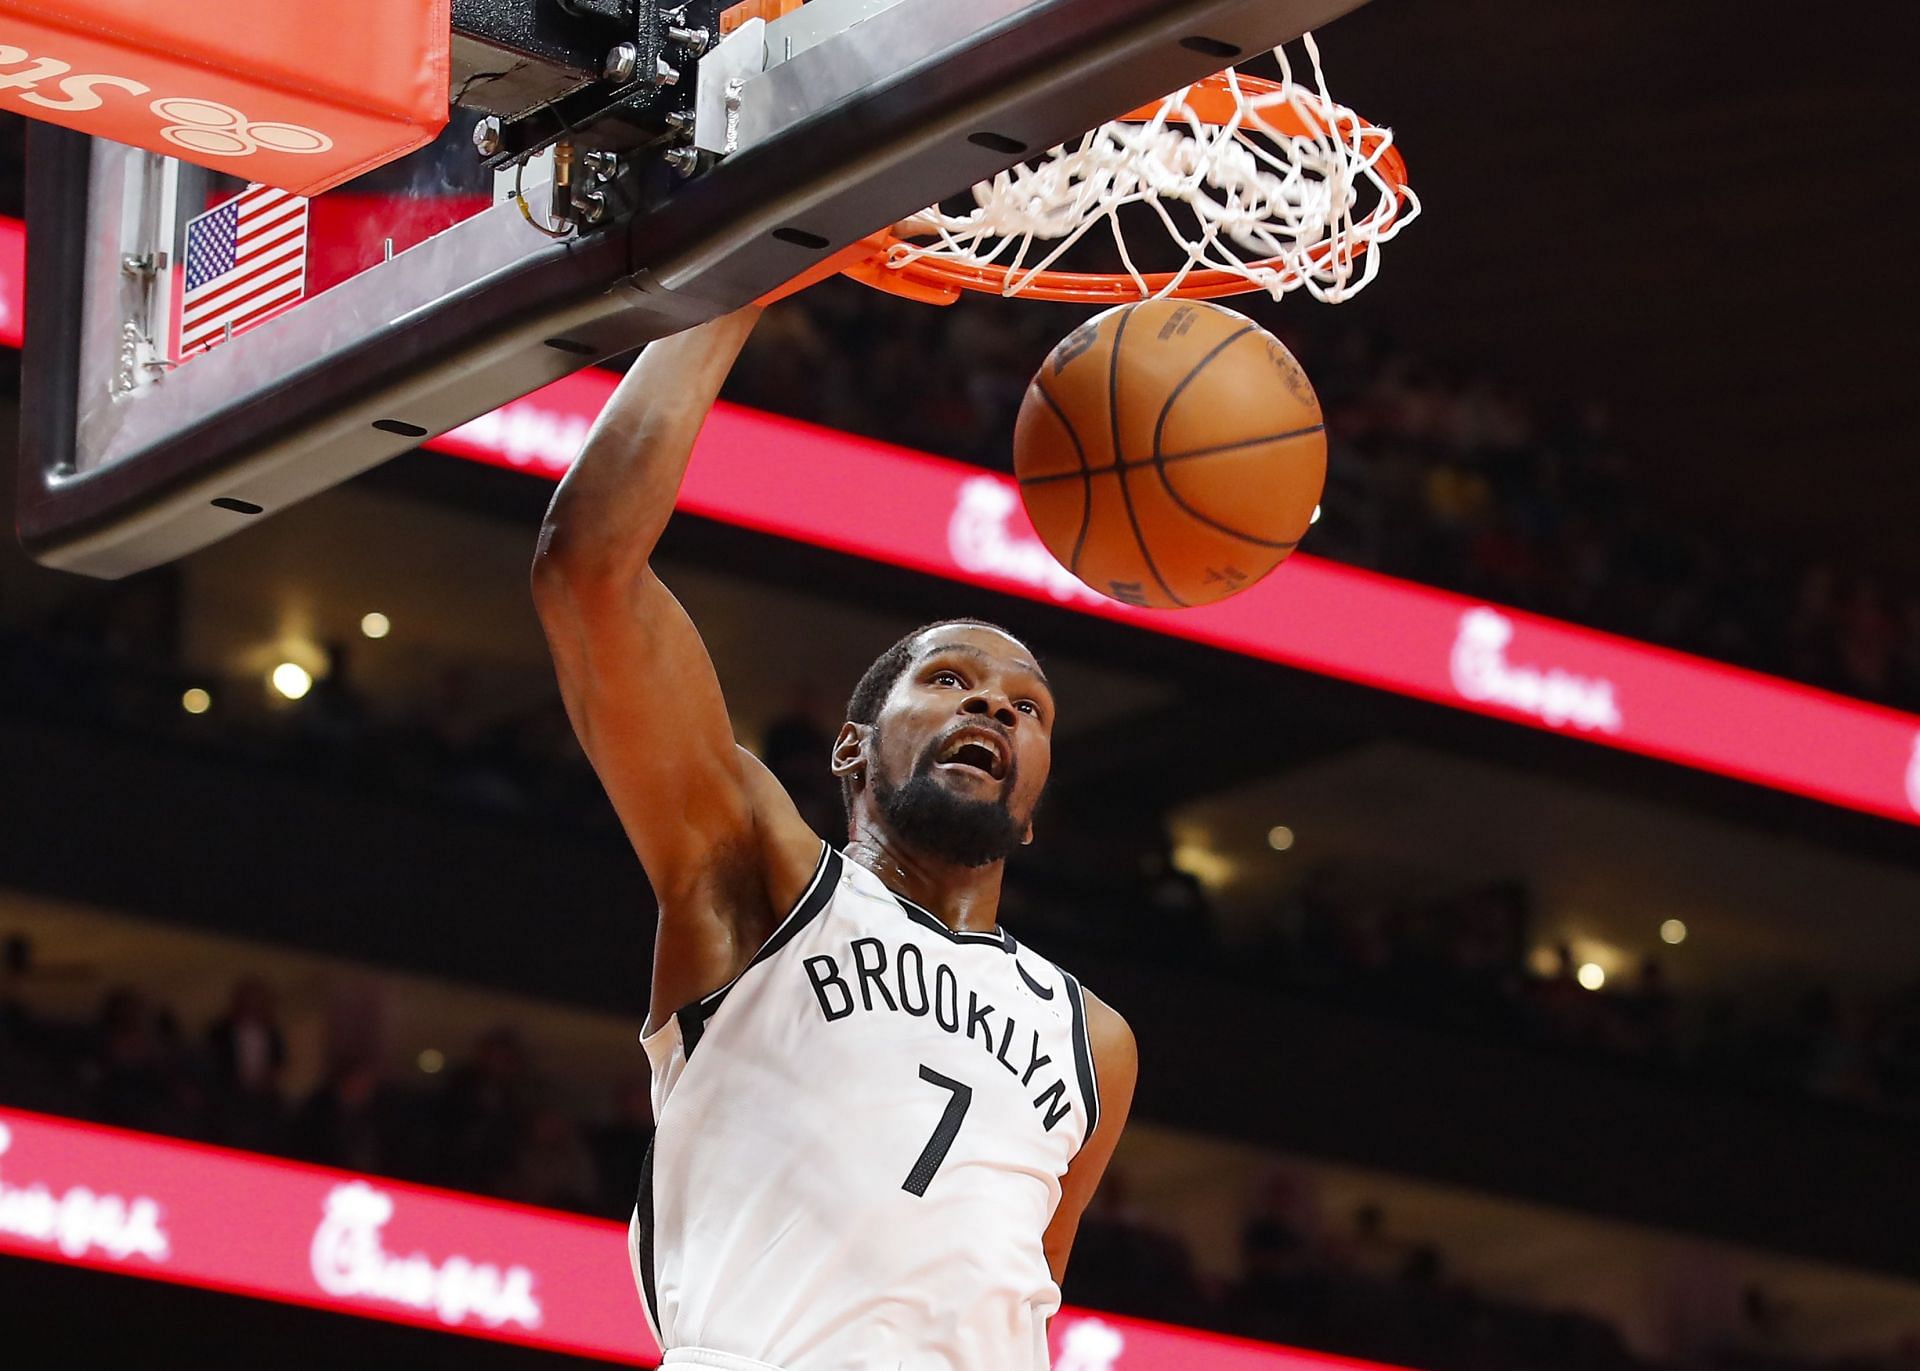 Kevin Durant had his highest scoring game for the Brooklyn Nets when he scored 51 points versus Detroit